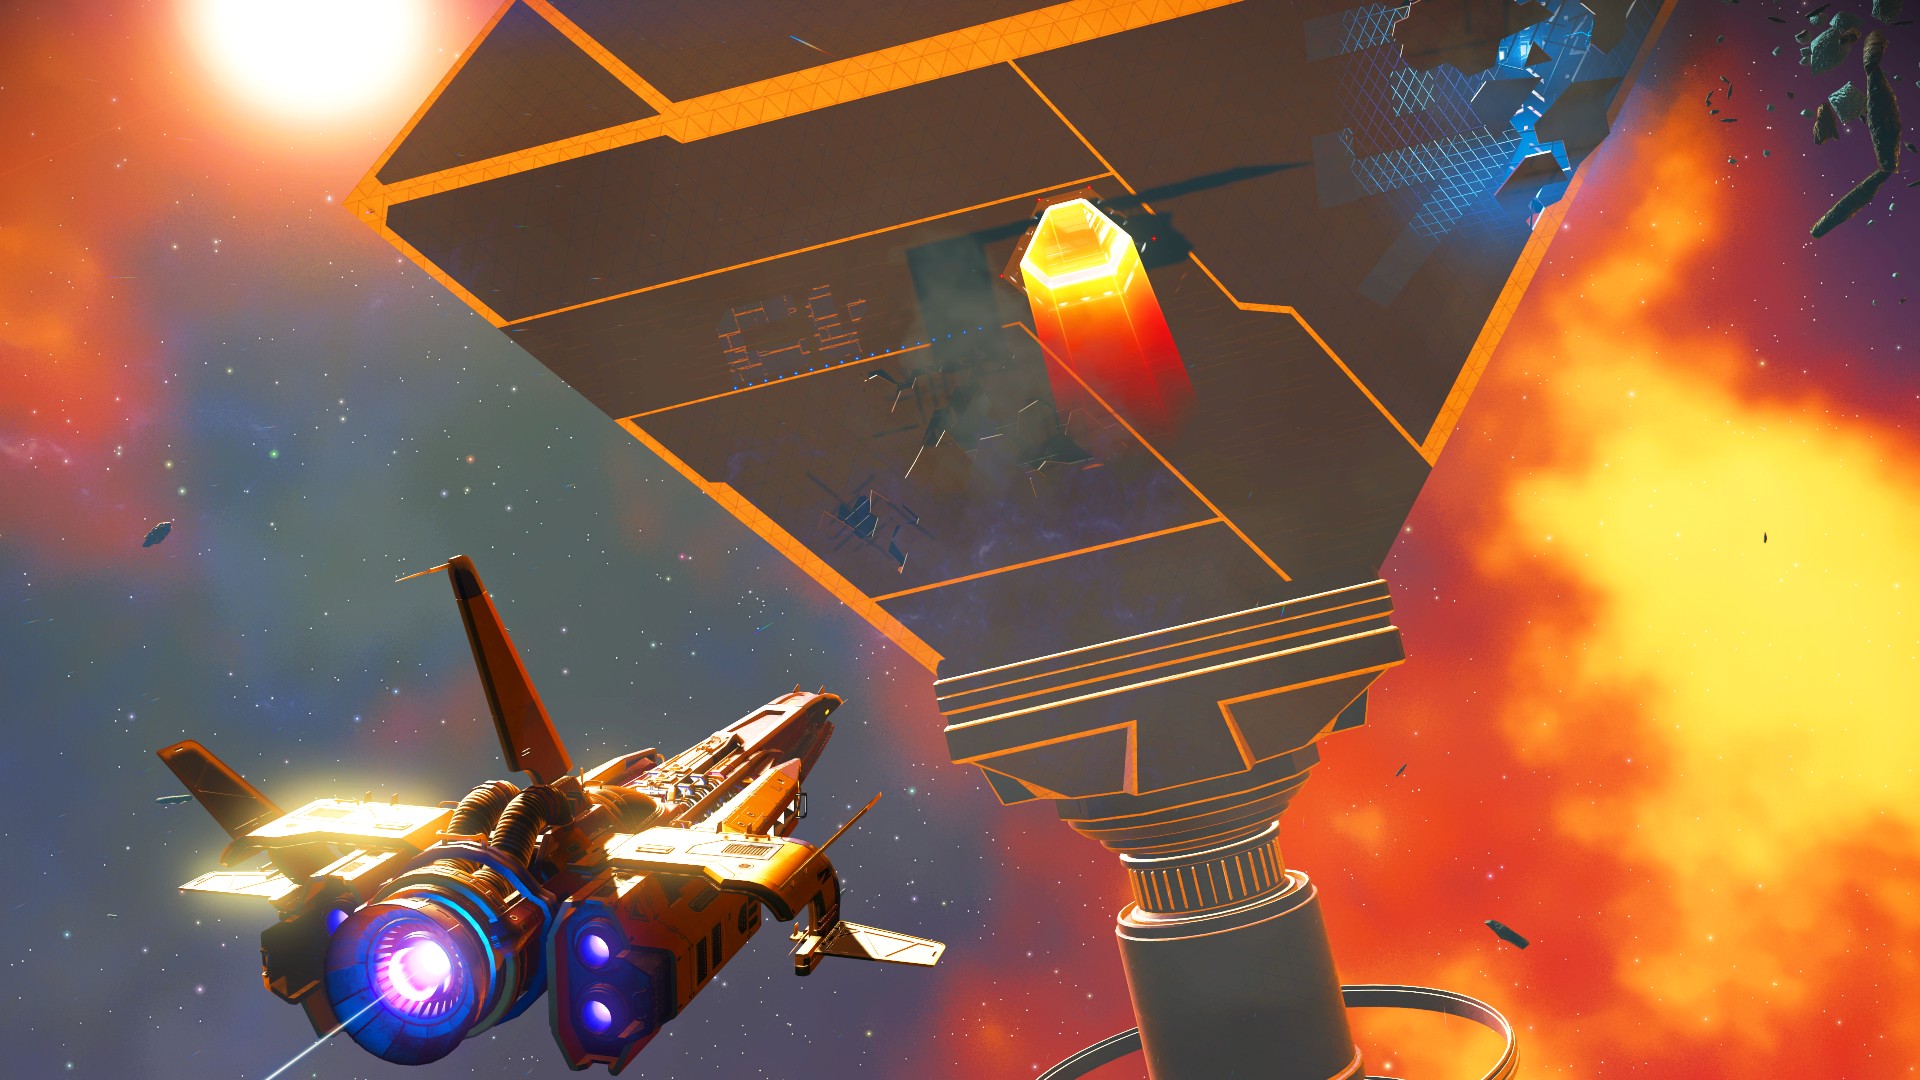 No Man's Sky is about to become the loneliest videogame in the world